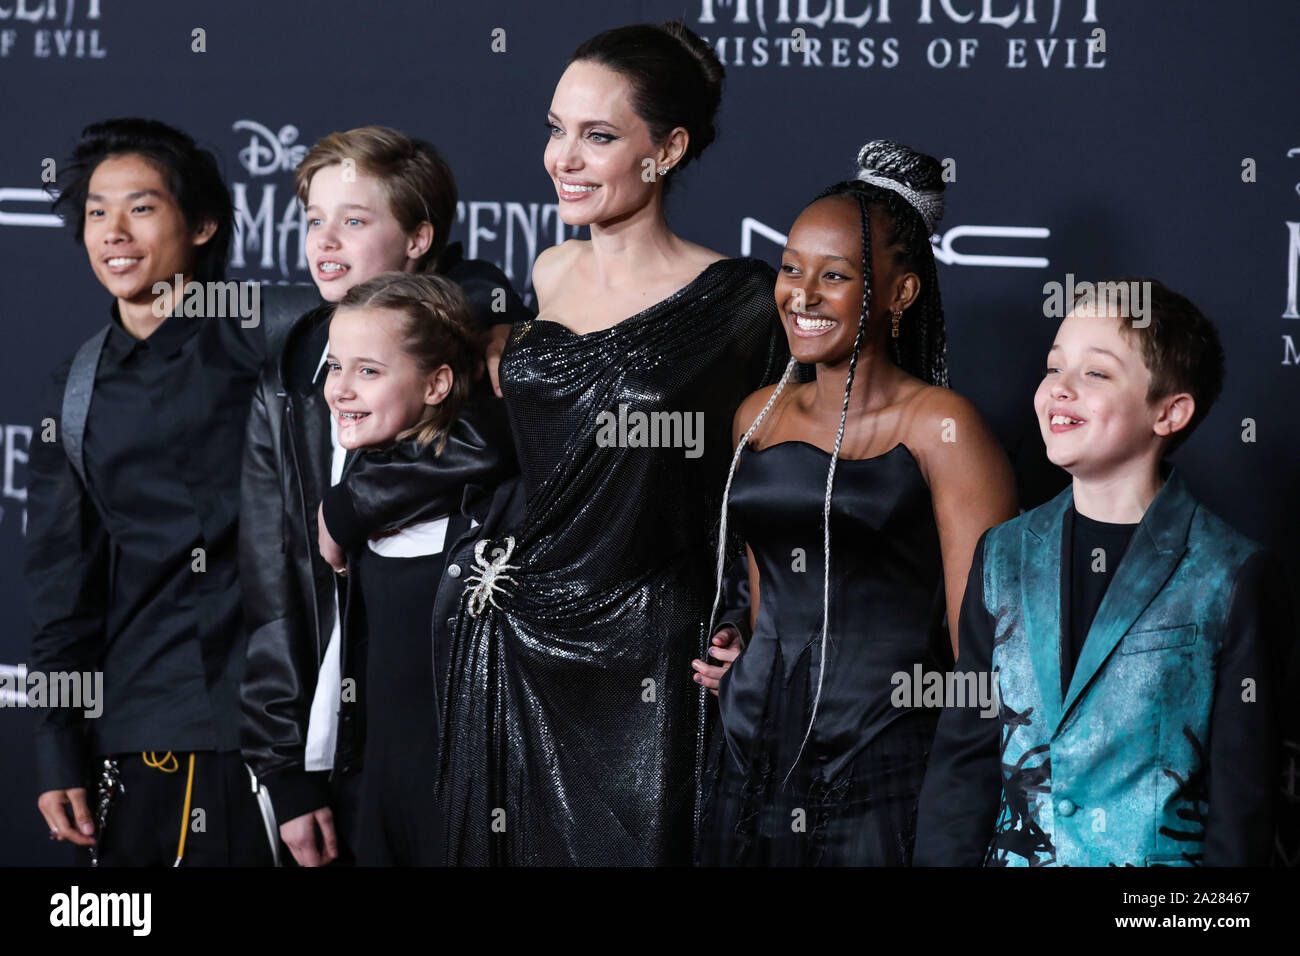 Hollywood, United States. 30th Sep, 2019. HOLLYWOOD, LOS ANGELES, CALIFORNIA, USA - SEPTEMBER 30: Pax Thien Jolie-Pitt, Shiloh Nouvel Jolie-Pitt, Vivienne Marcheline Jolie-Pitt, Angelina Jolie, Zahara Marley Jolie-Pitt and Knox Leon Jolie-Pitt arrive at the World Premiere Of Disney's 'Maleficent: Mistress Of Evil' held at the El Capitan Theatre on September 30, 2019 in Hollywood, Los Angeles, California, United States. (Photo by Xavier Collin/Image Press Agency) Credit: Image Press Agency/Alamy Live News Stock Photo